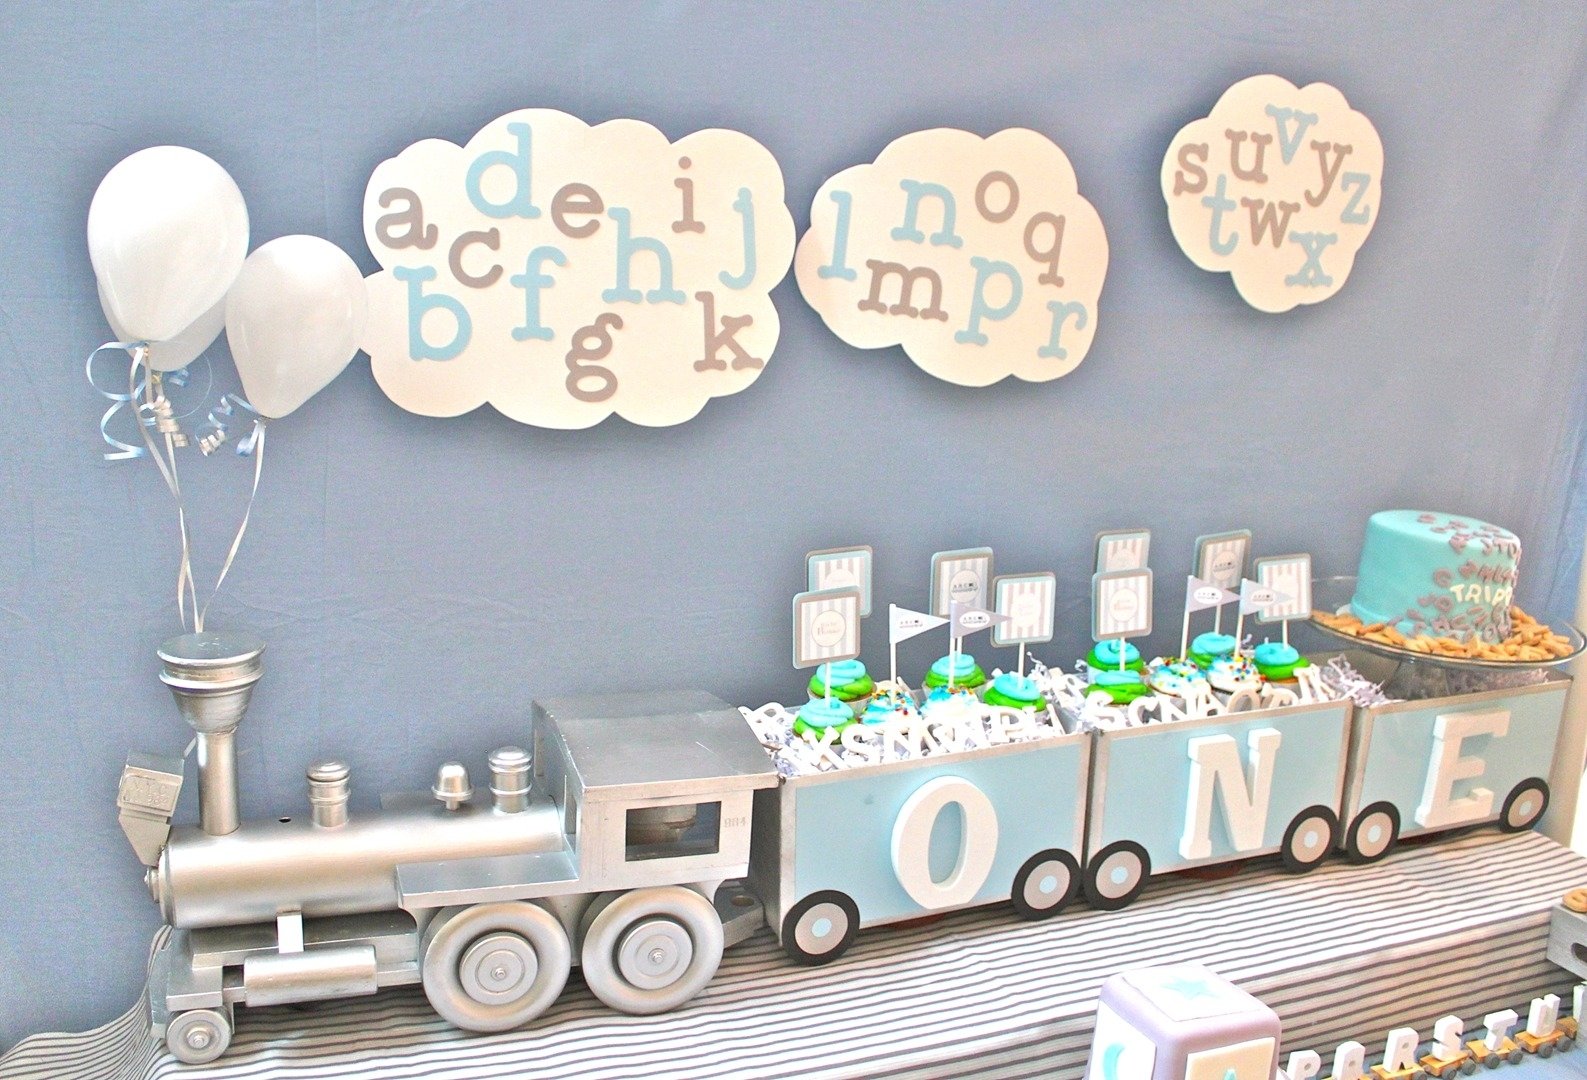 10 Most Popular 1St Birthday Party Ideas For Boys Themes cute boy birthday party themes dma homes 73258 3 2022